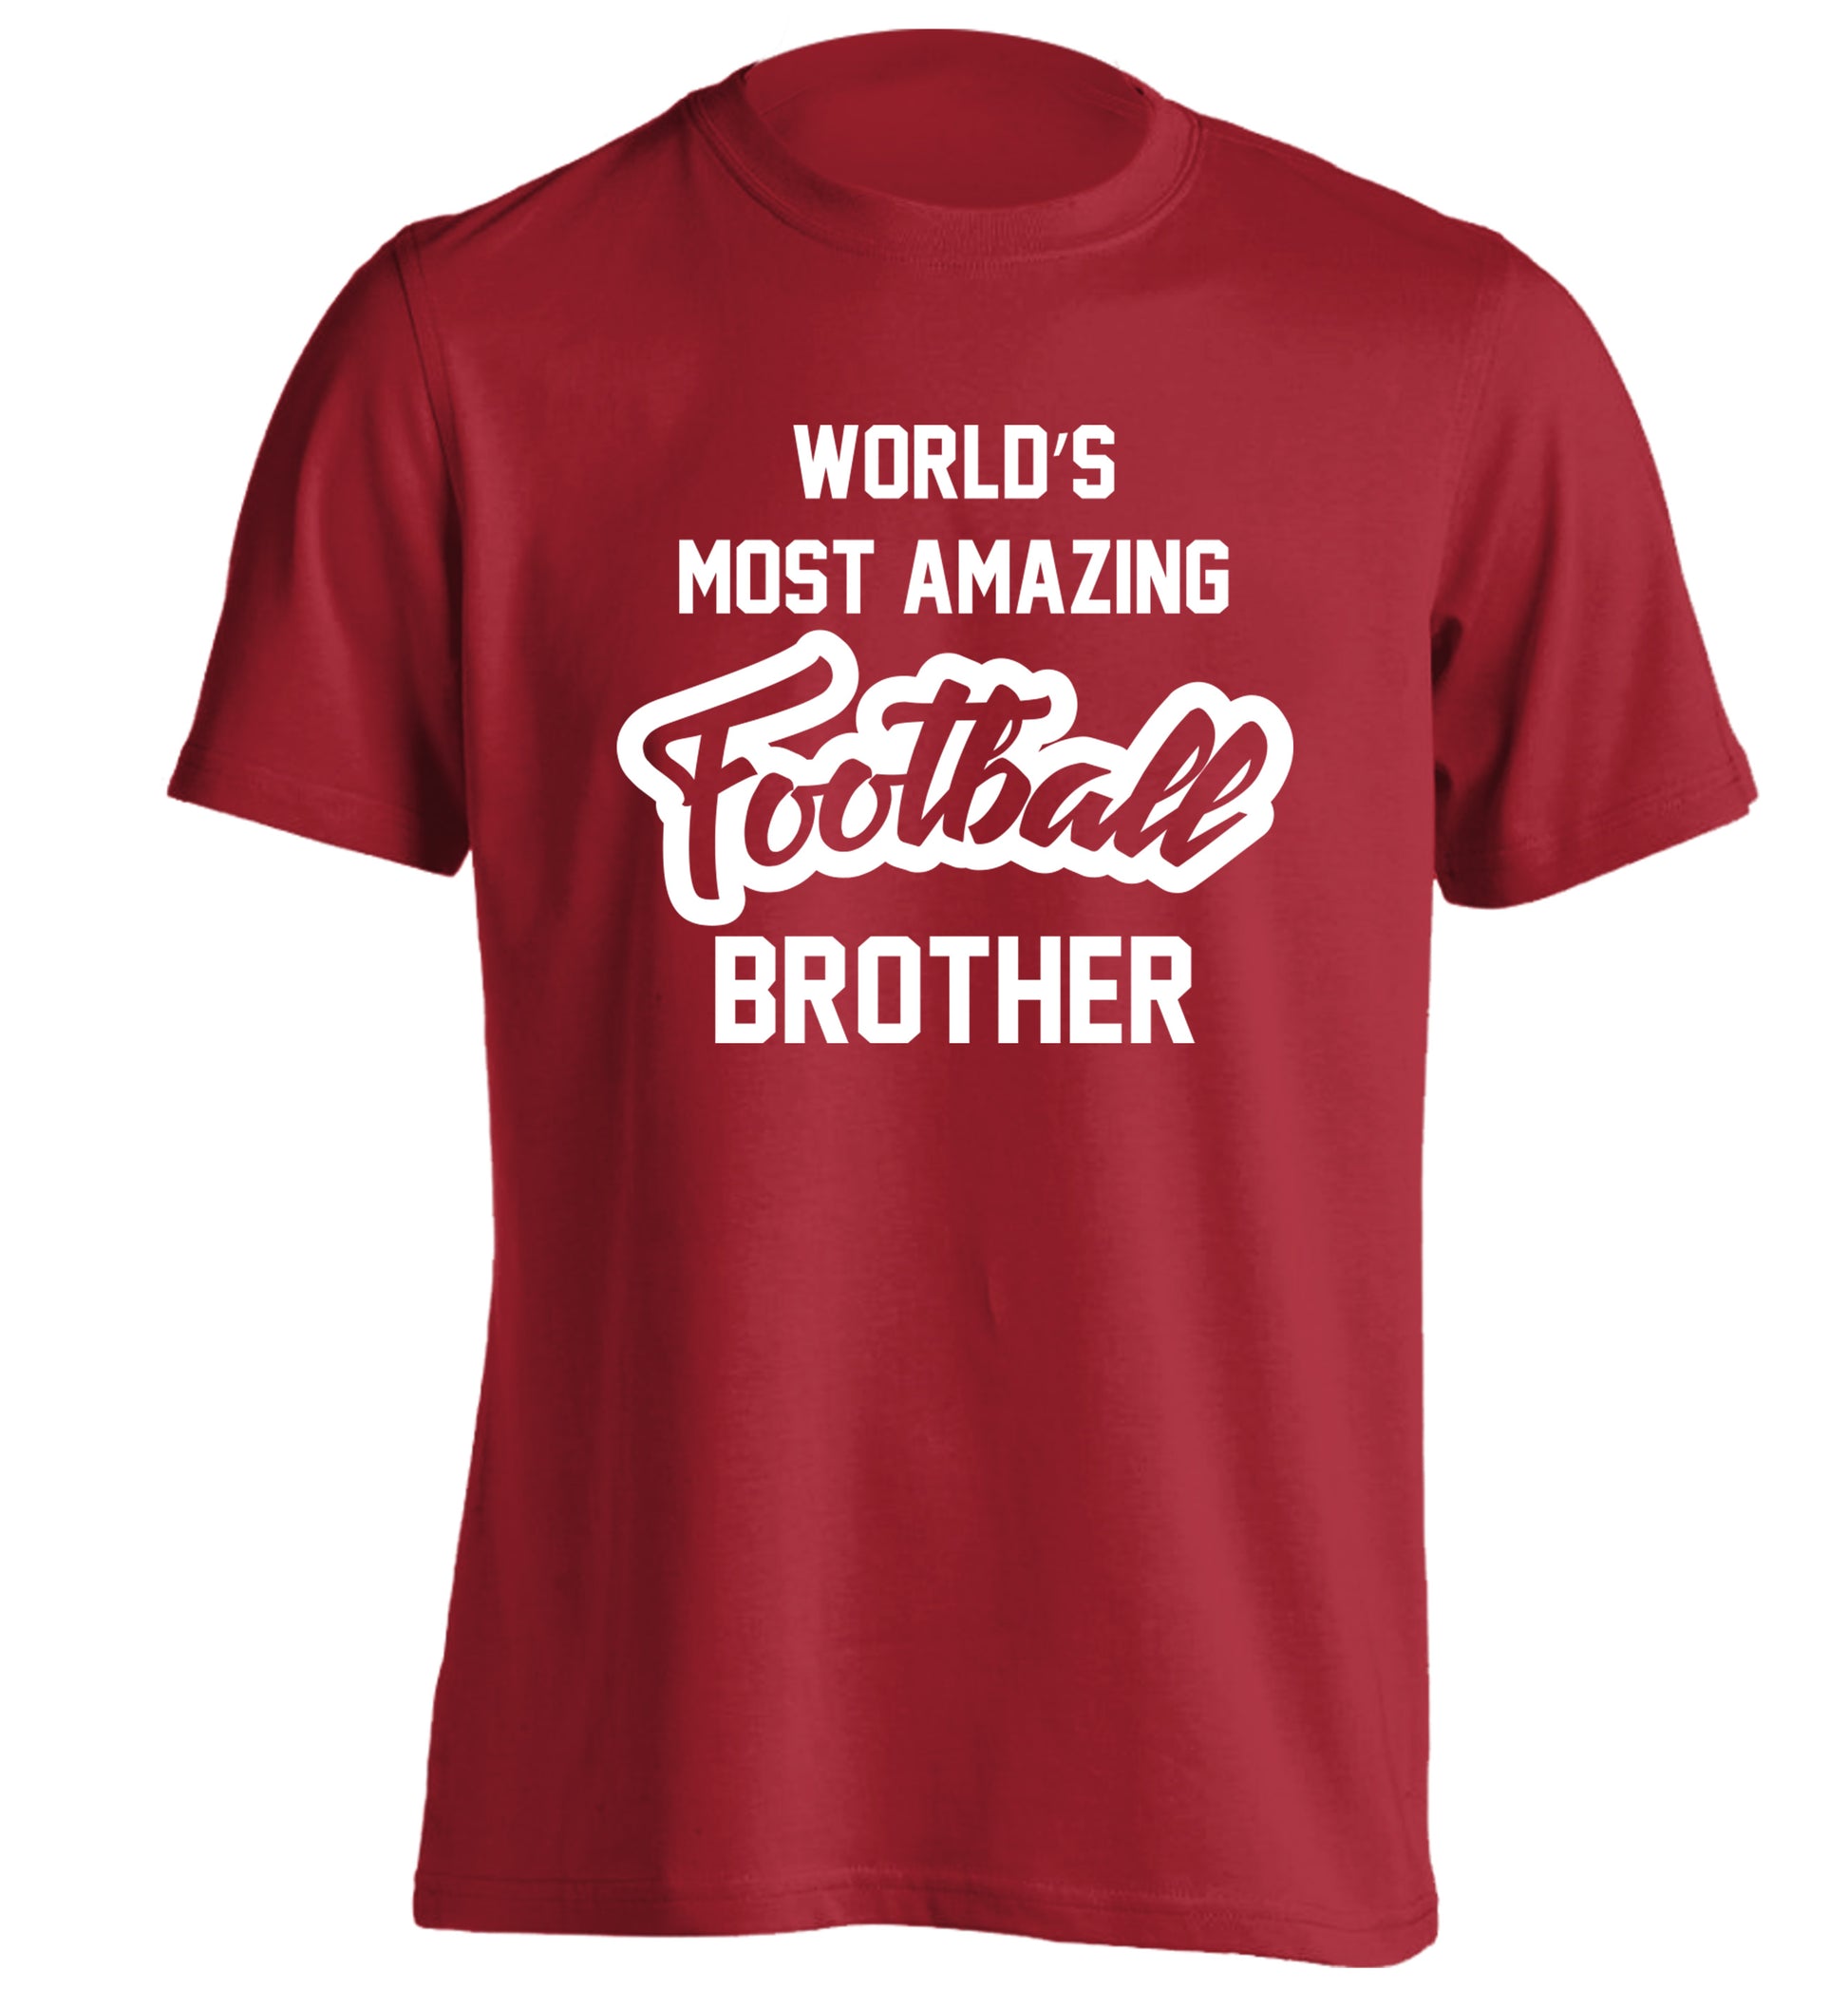 Worlds most amazing football brother adults unisexred Tshirt 2XL